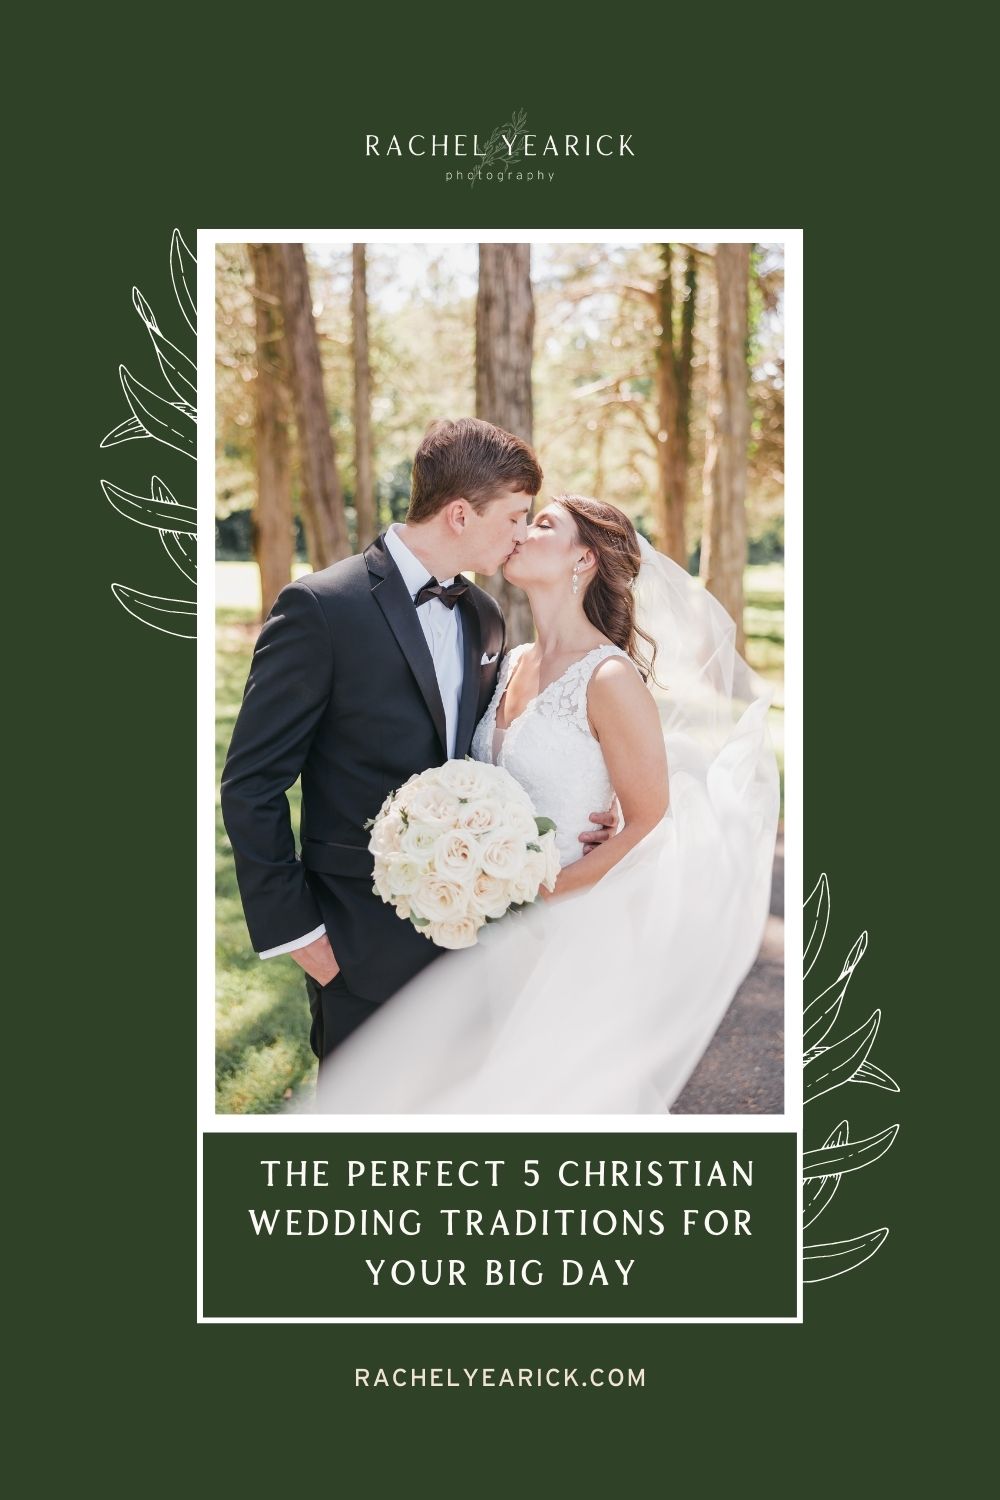 Bride and groom sharing a kiss during their wedding shoot; image overlaid with text that reads The Perfect 5 Christian Wedding Traditions For Your Big Day